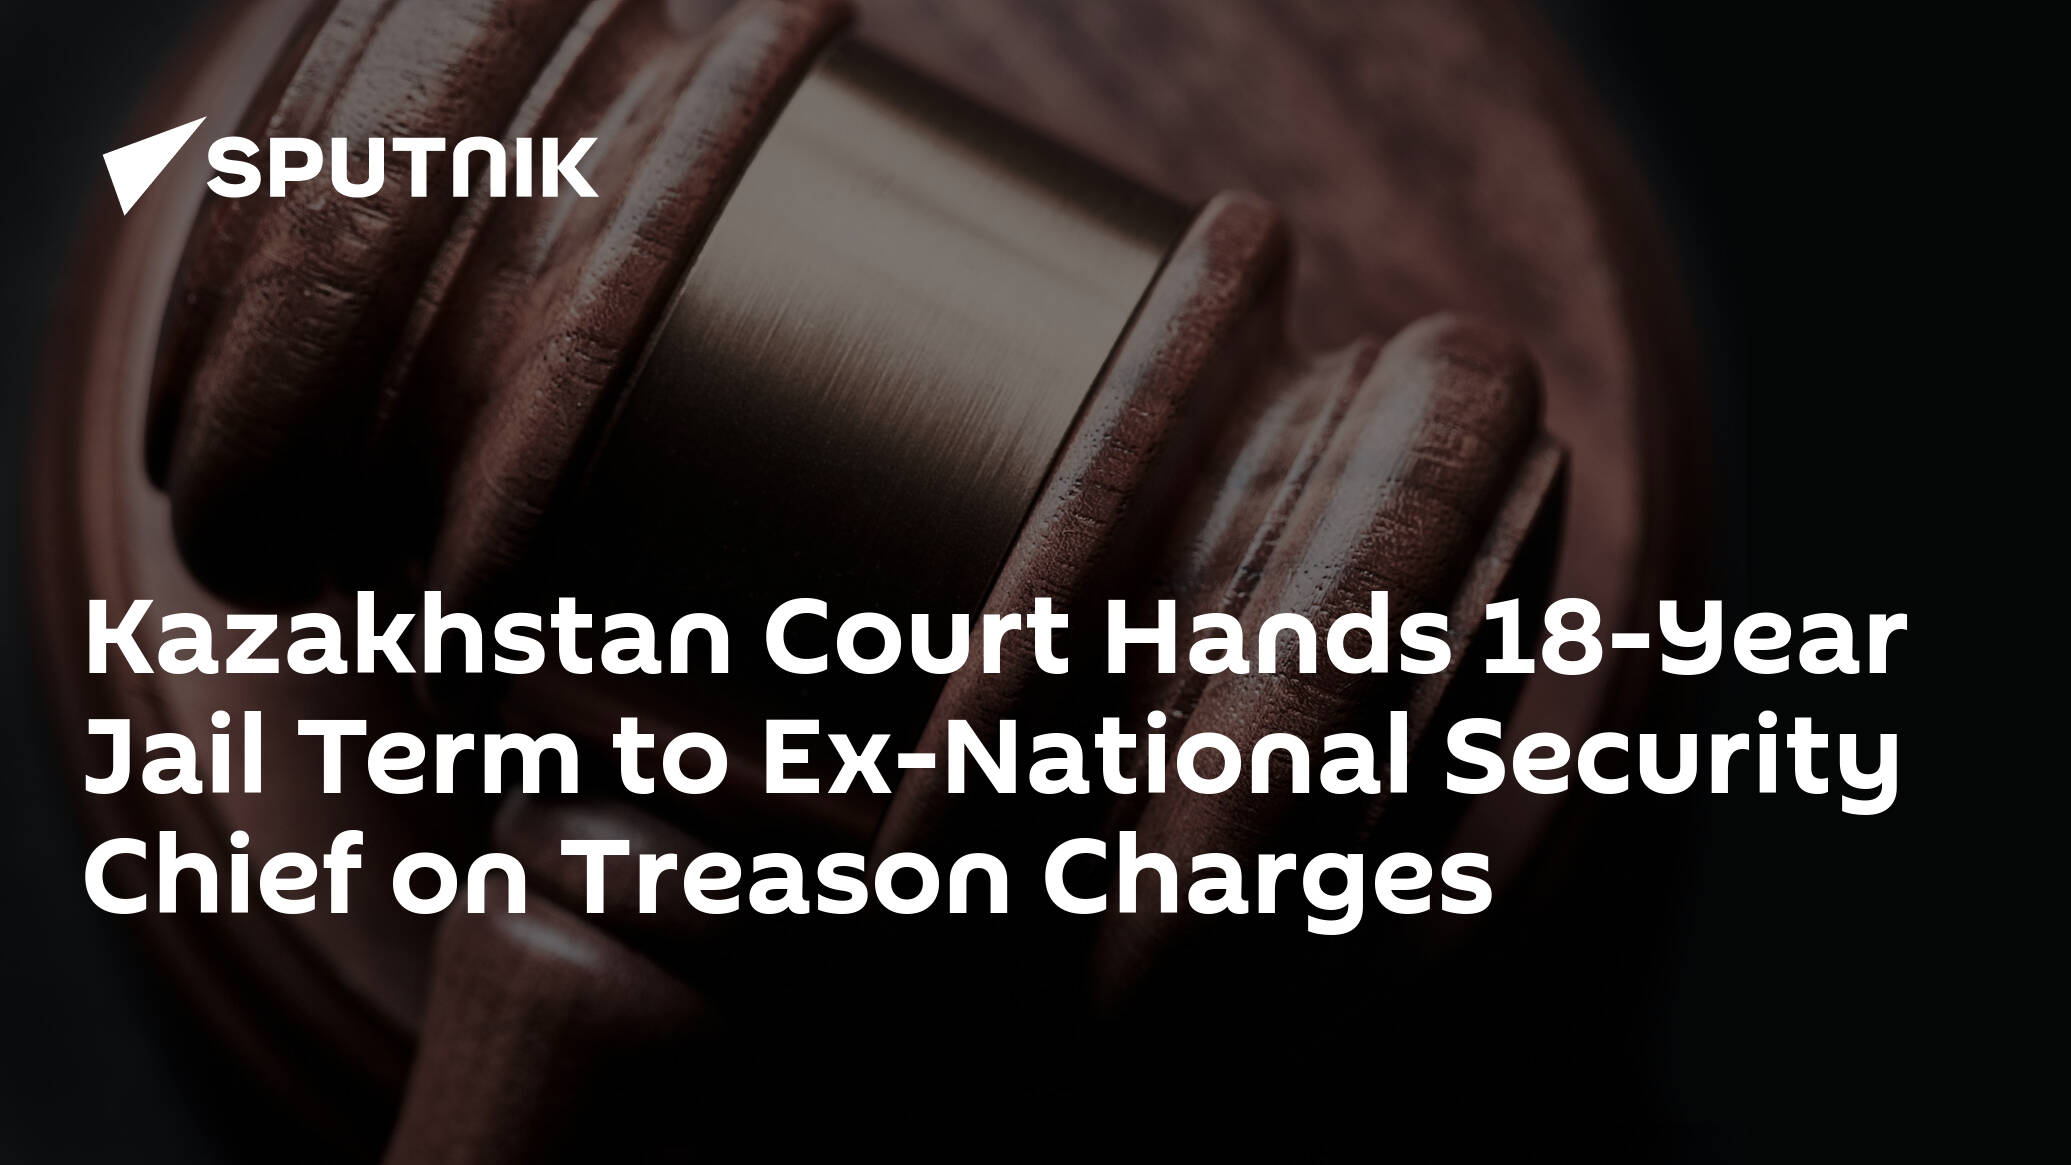 Kazakhstan Court Hands 18-Year Jail Term to Ex-National Security Chief on Treason Charges